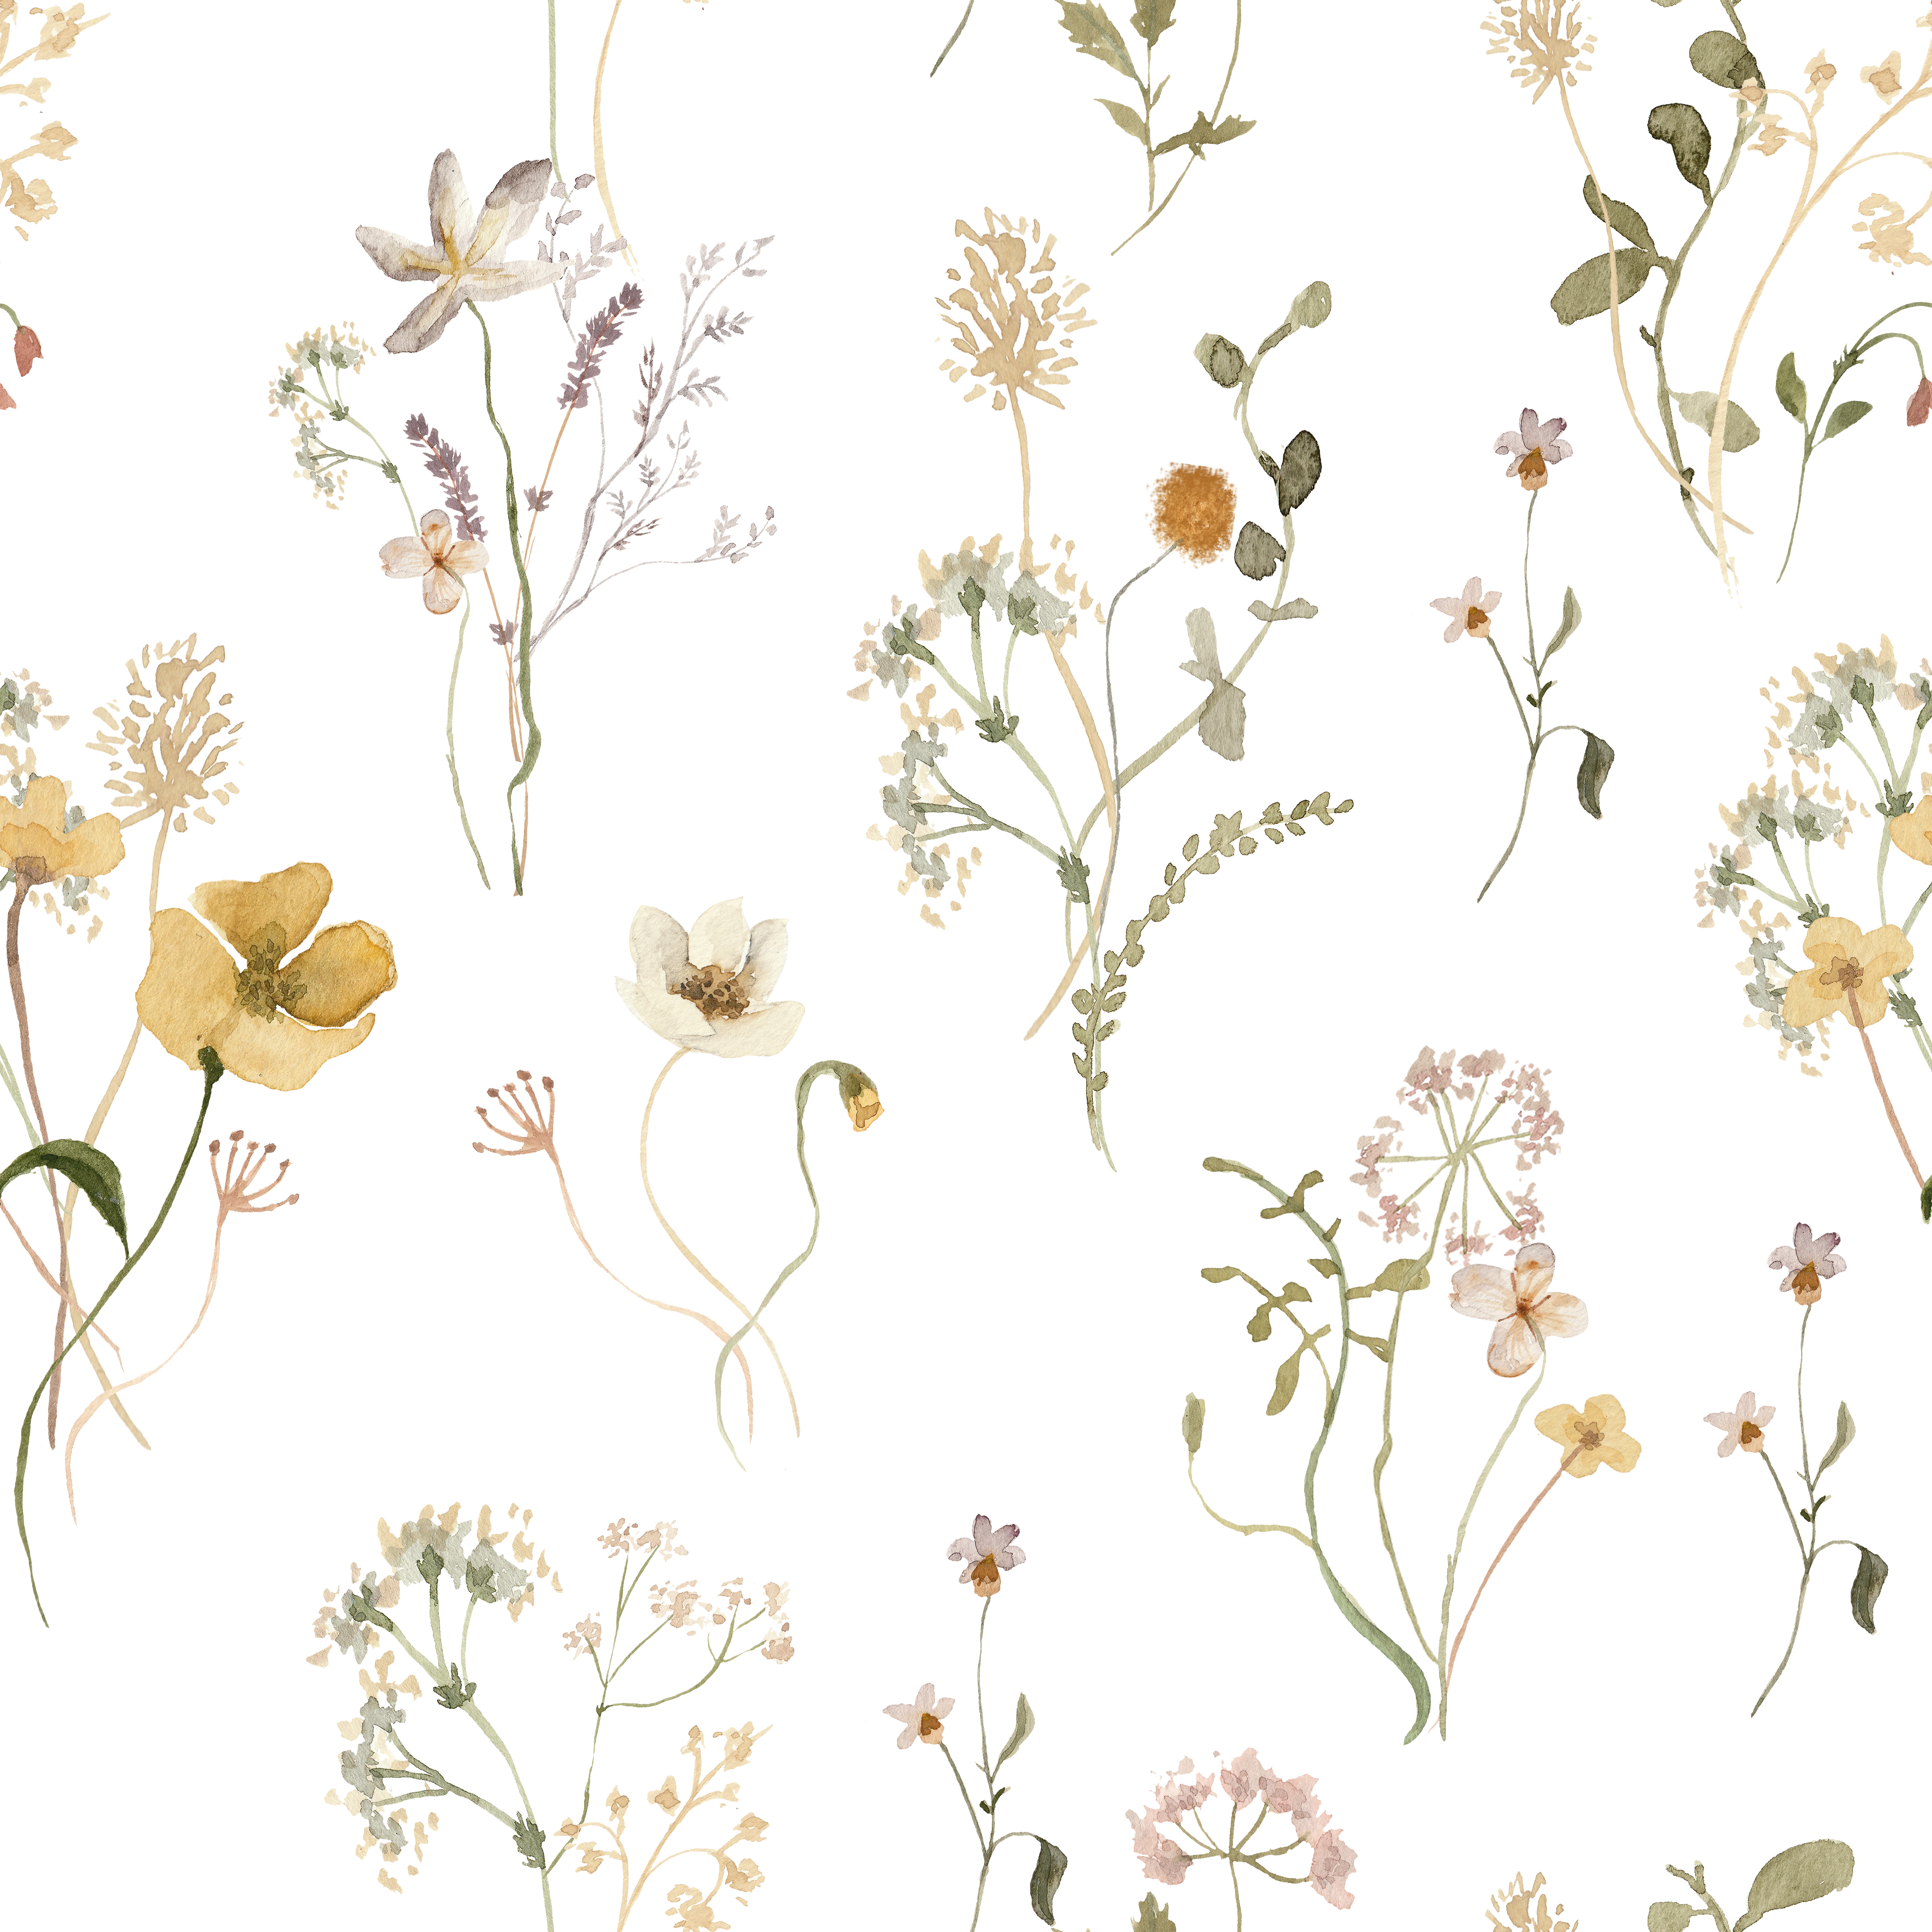 The Delicate Floral Wallpaper set against a black background, highlighting the detailed botanical illustrations with a striking and elegant contrast.